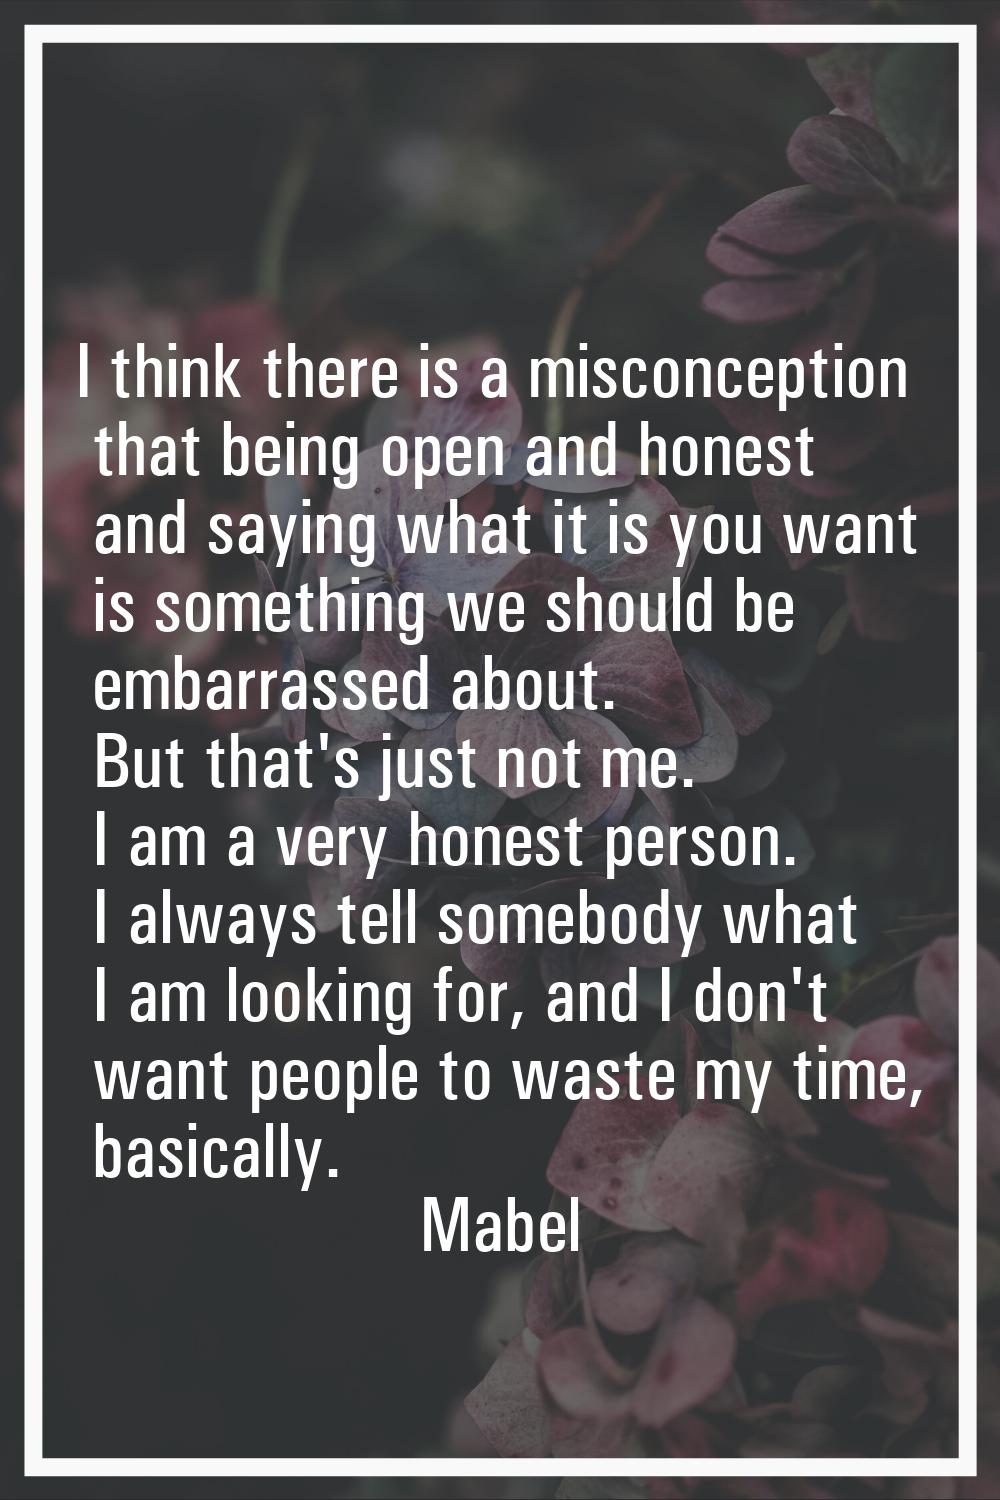 I think there is a misconception that being open and honest and saying what it is you want is somet